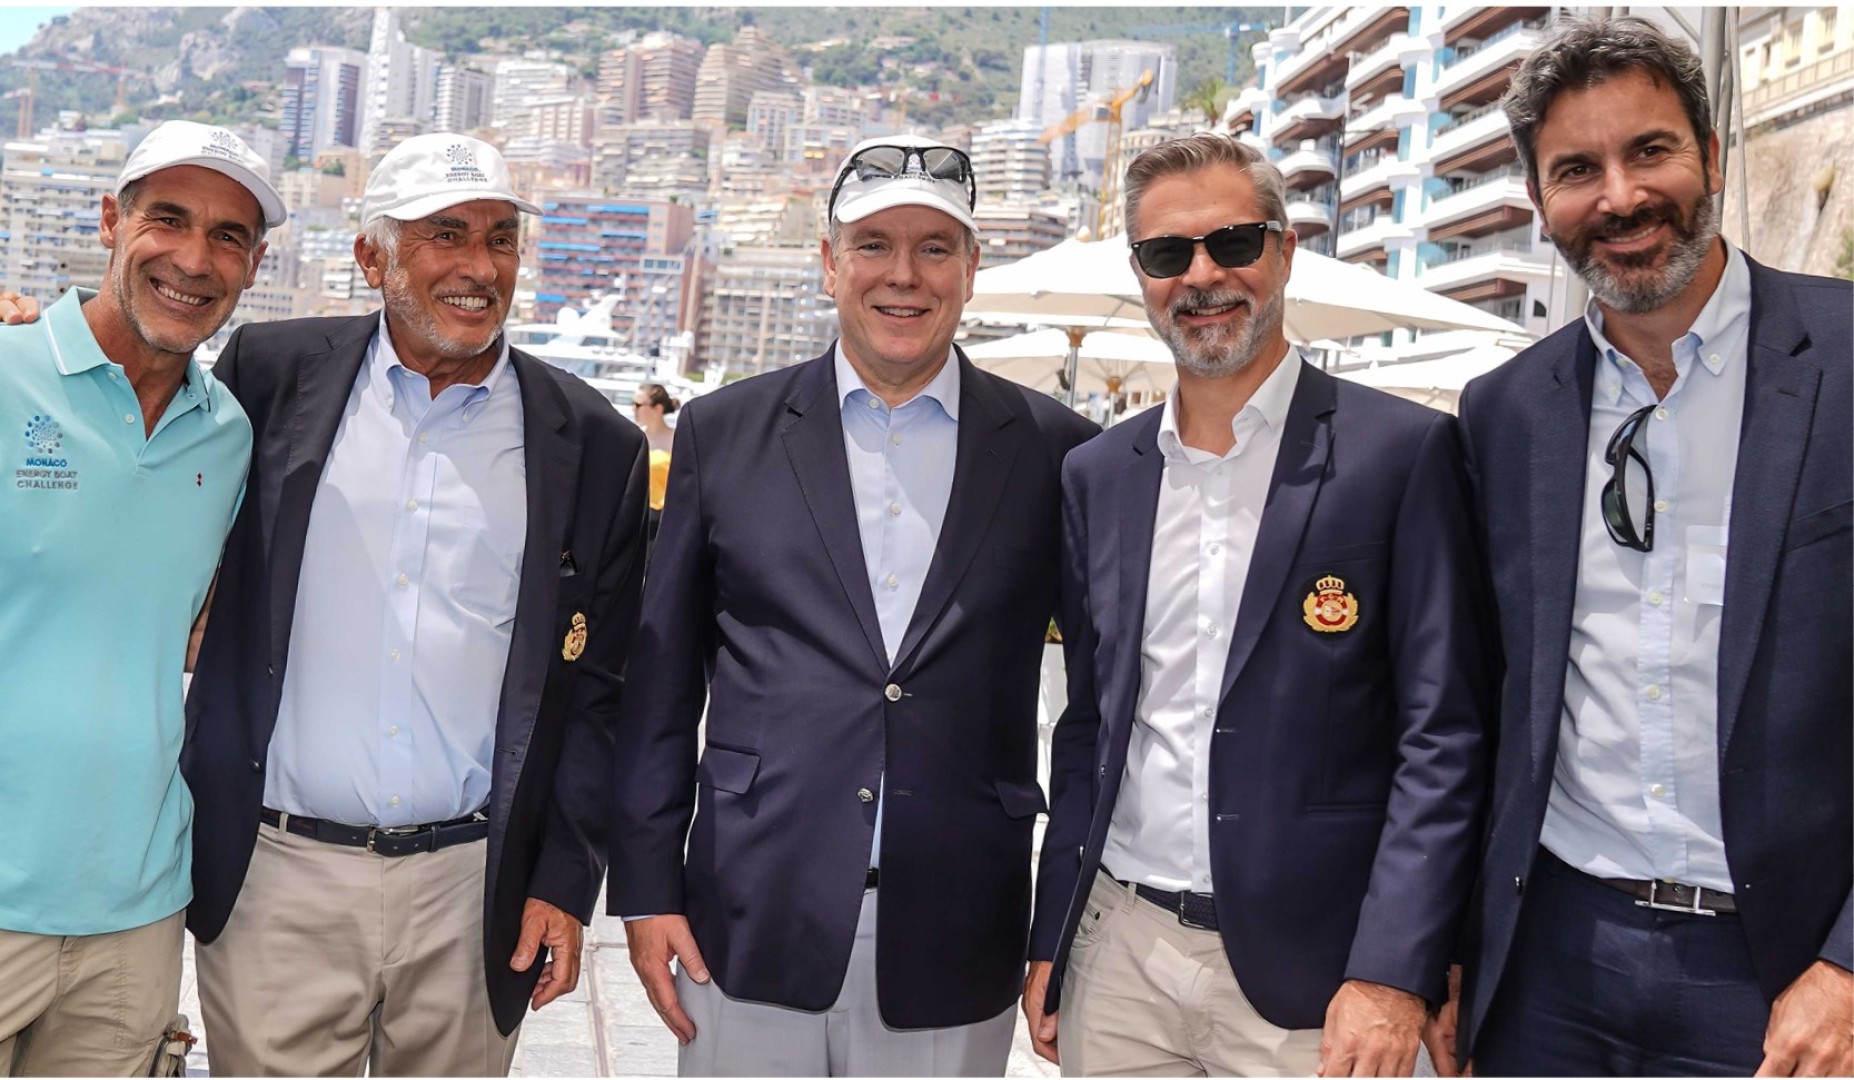 HSH Prince Albert II of Monaco surrounded (l-r) by 
Mike Horn, Bernard d'Alessandri, Michel Buffat and Jérémie Lagarrigue